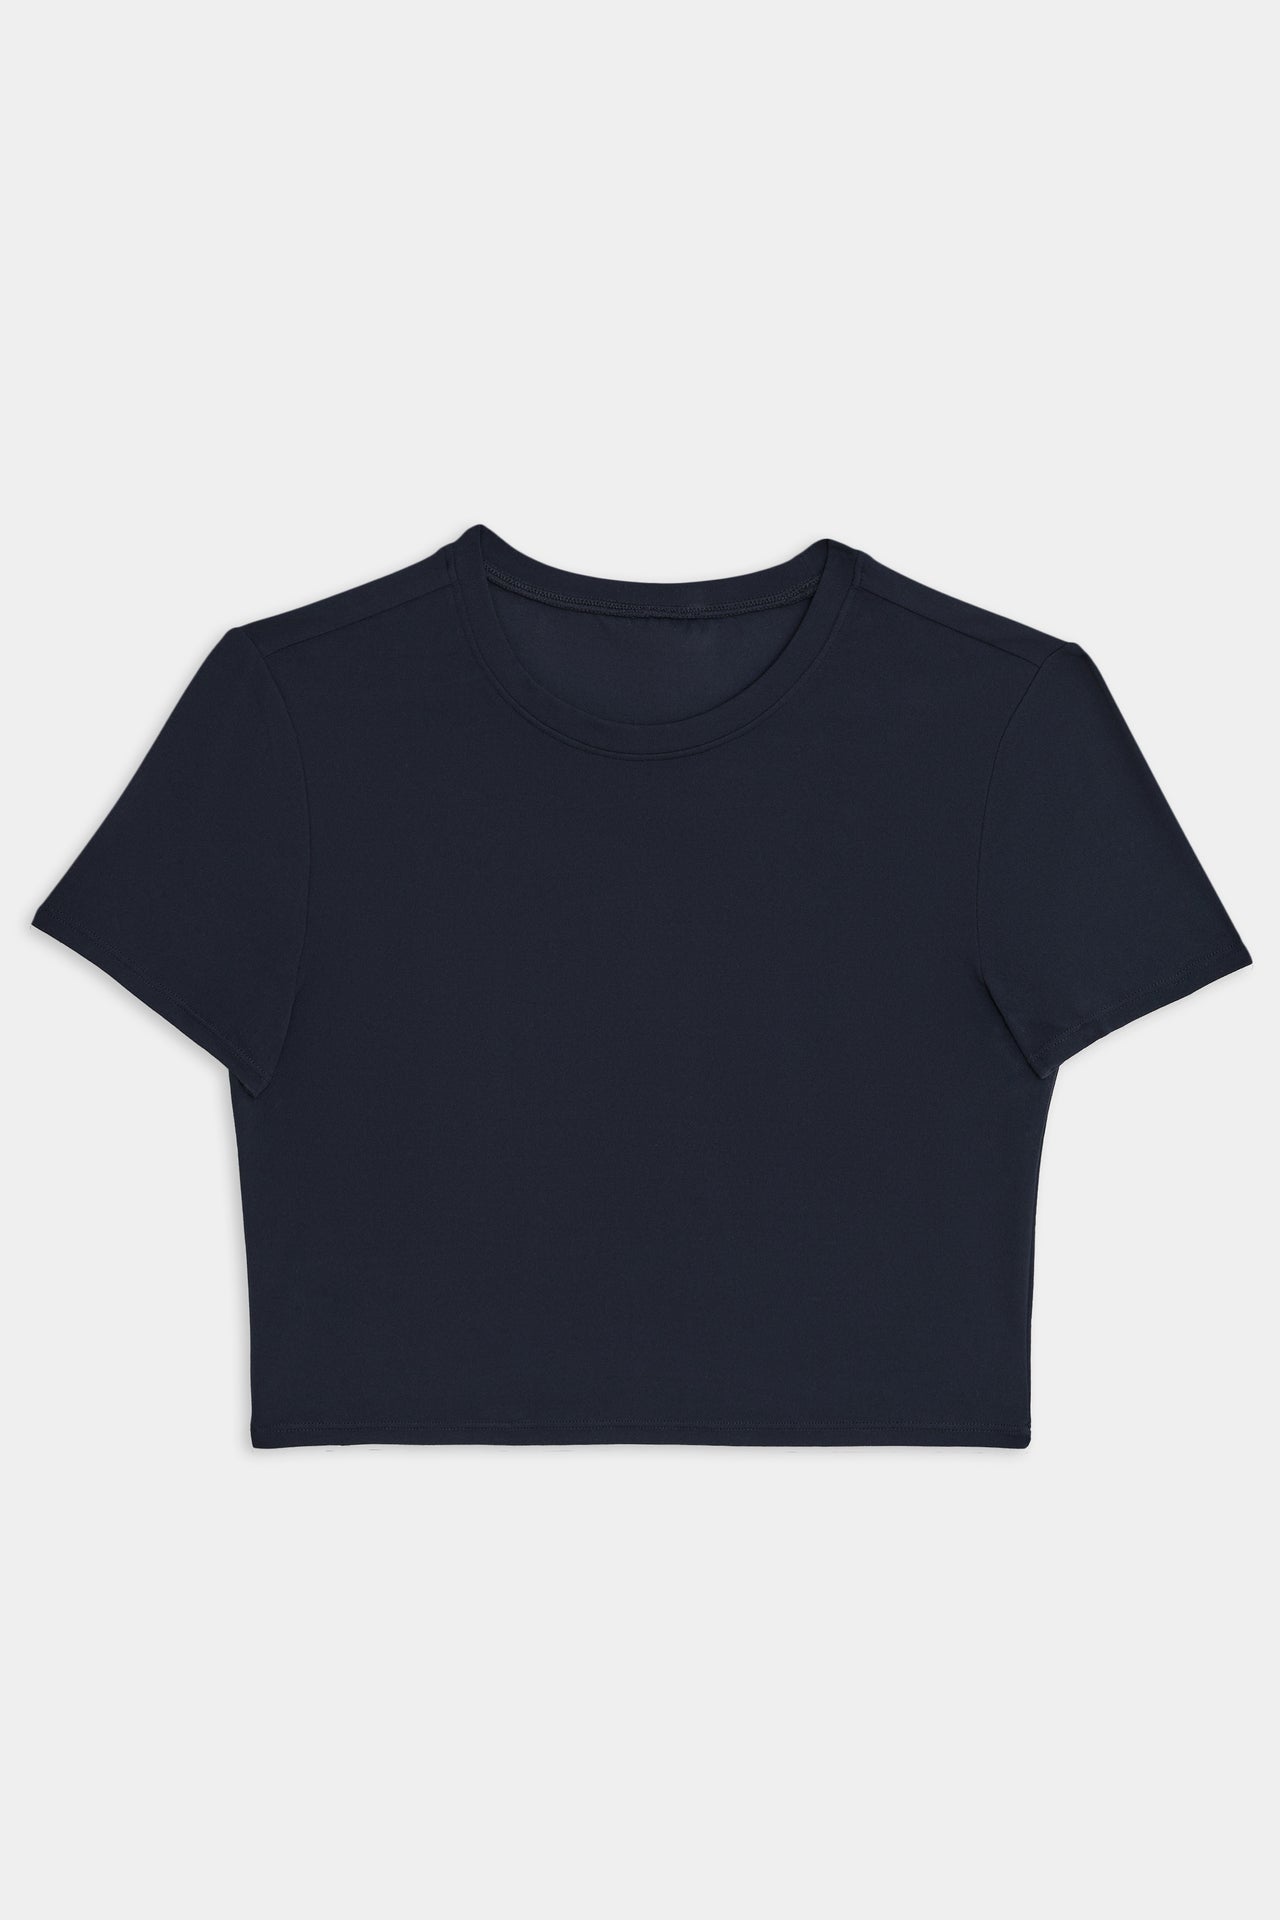 Airweight S/S Crop - Indigo cropped t-shirt by SPLITS59 made of Nylon Spandex stretch material on a white background.